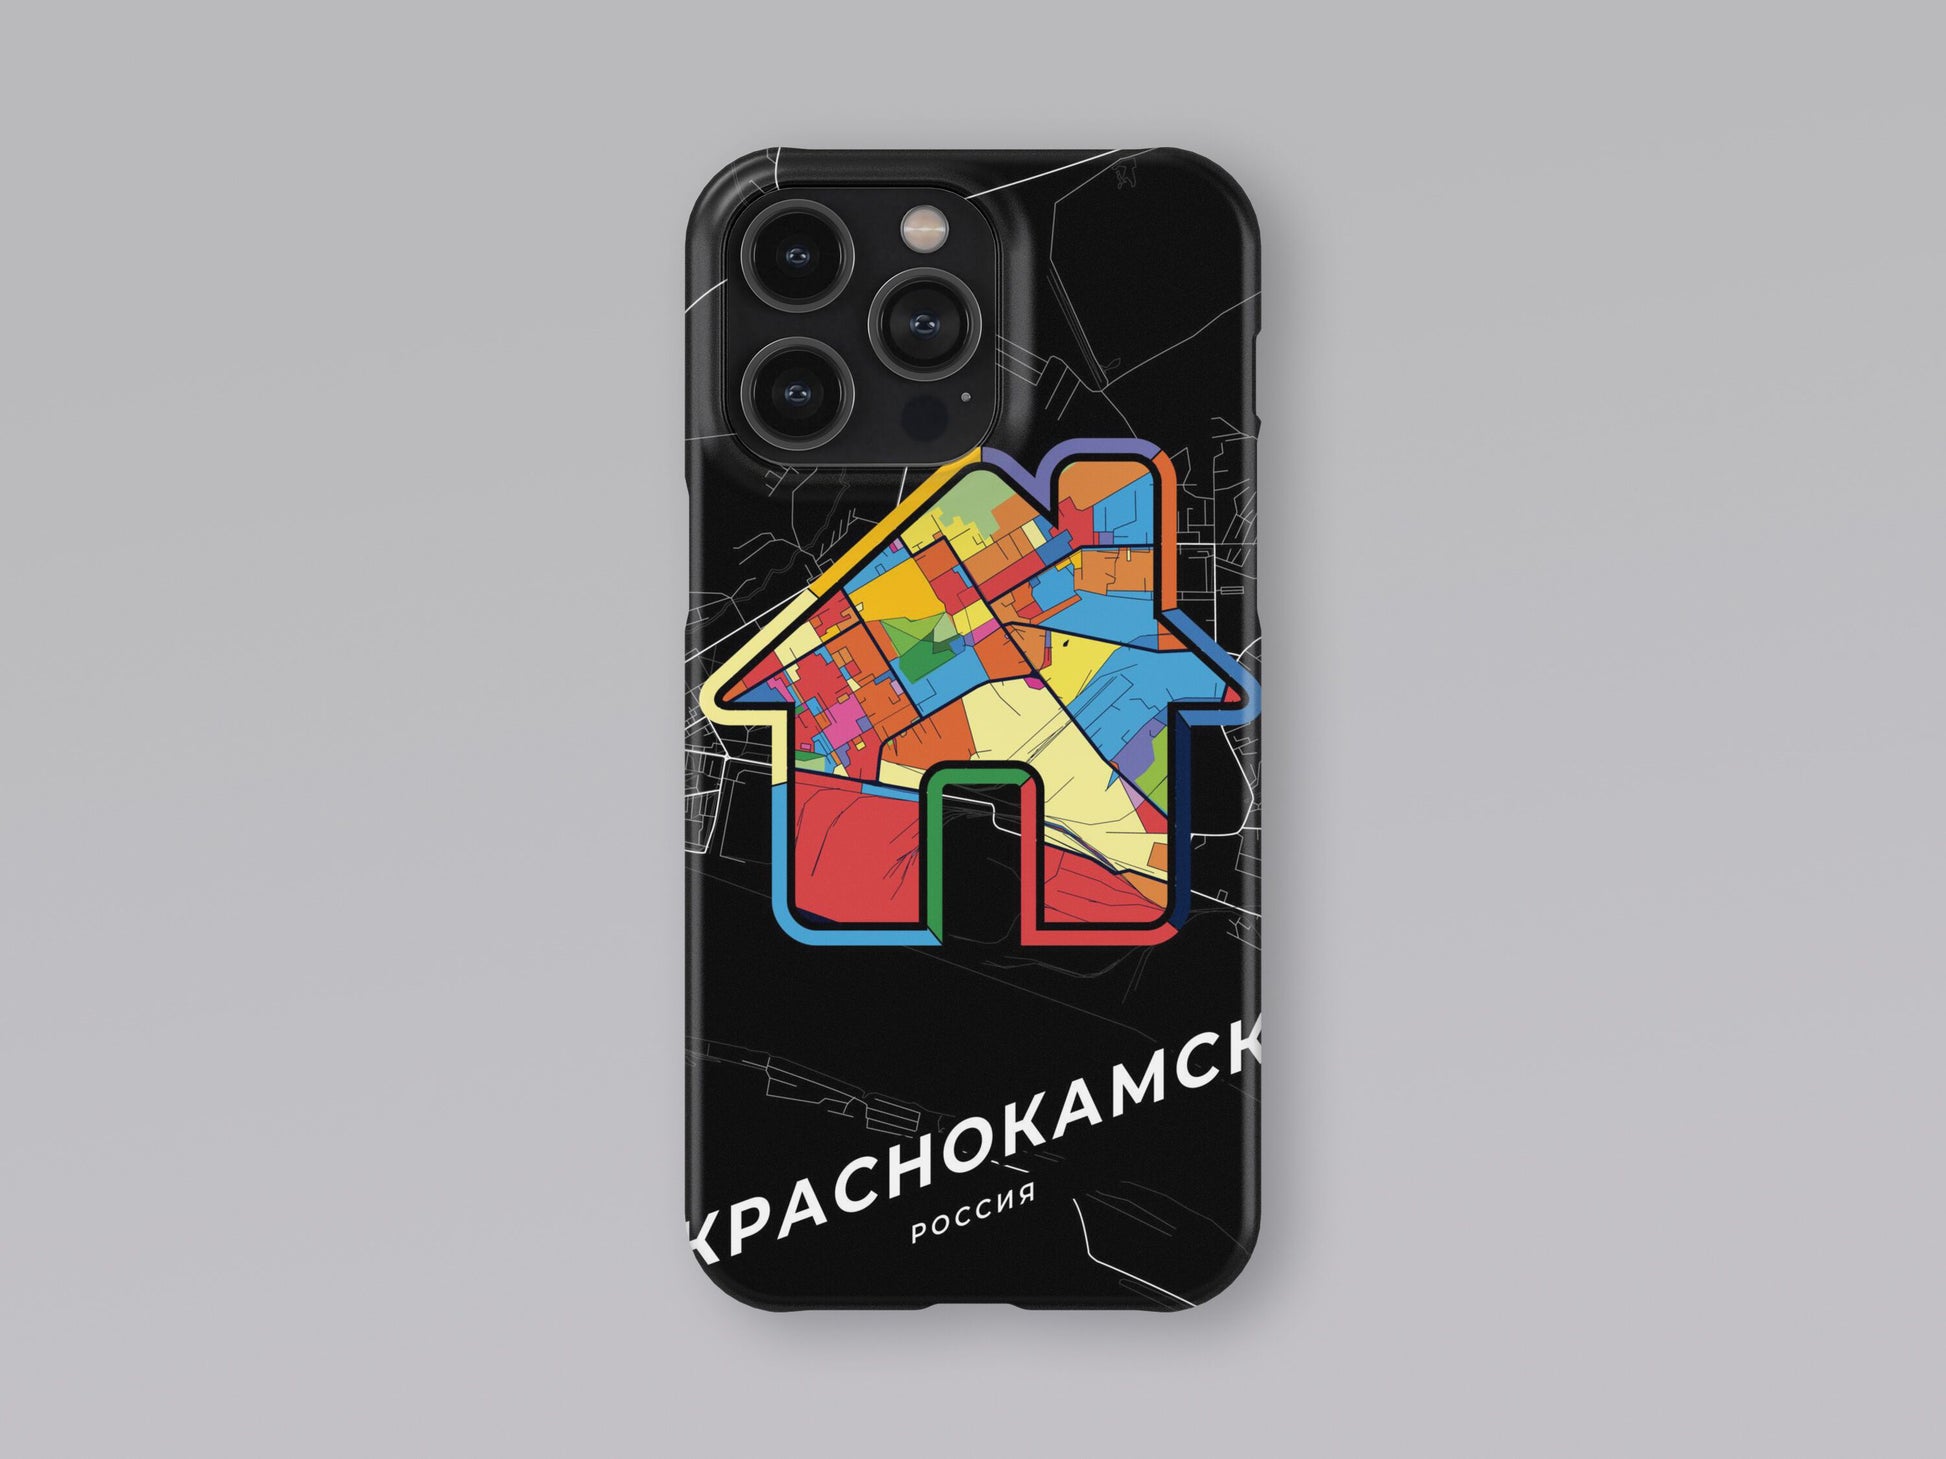 Krasnokamsk Russia slim phone case with colorful icon. Birthday, wedding or housewarming gift. Couple match cases. 3